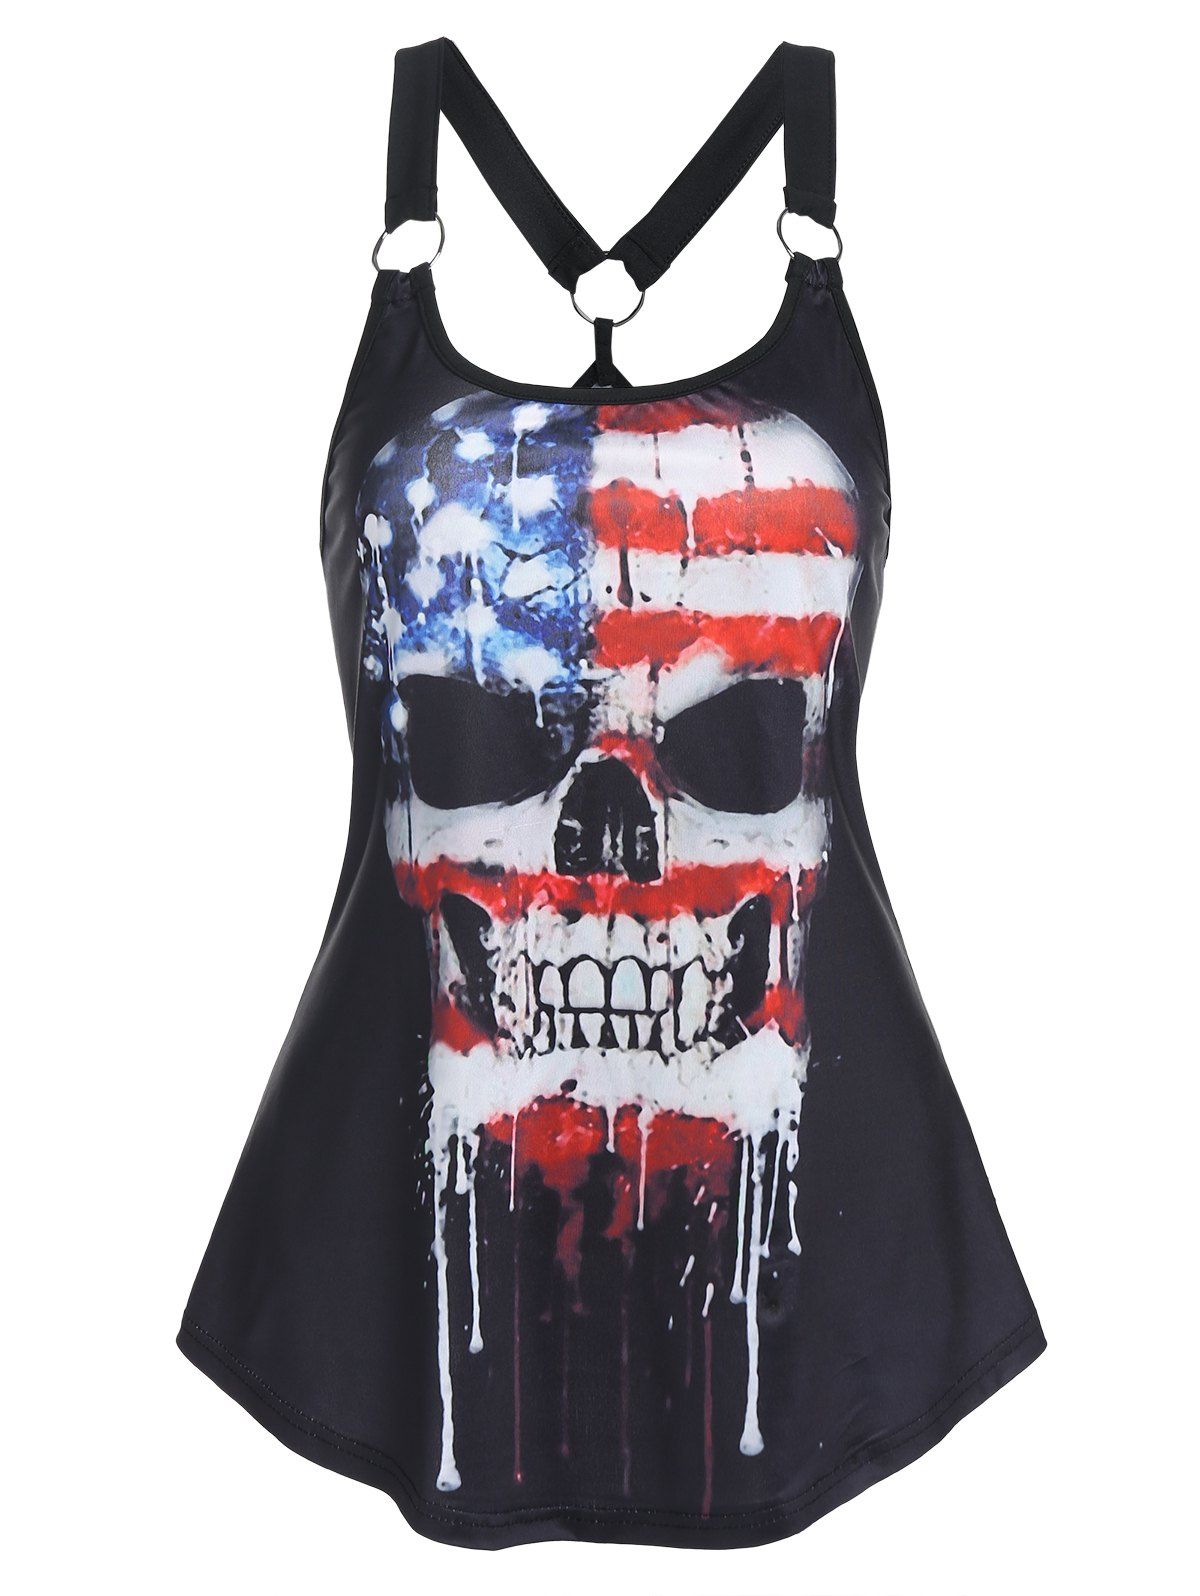 Gothic Casual Tank Top American Flag Skull Print O Ring Cut Out Summer Top - BLACK M